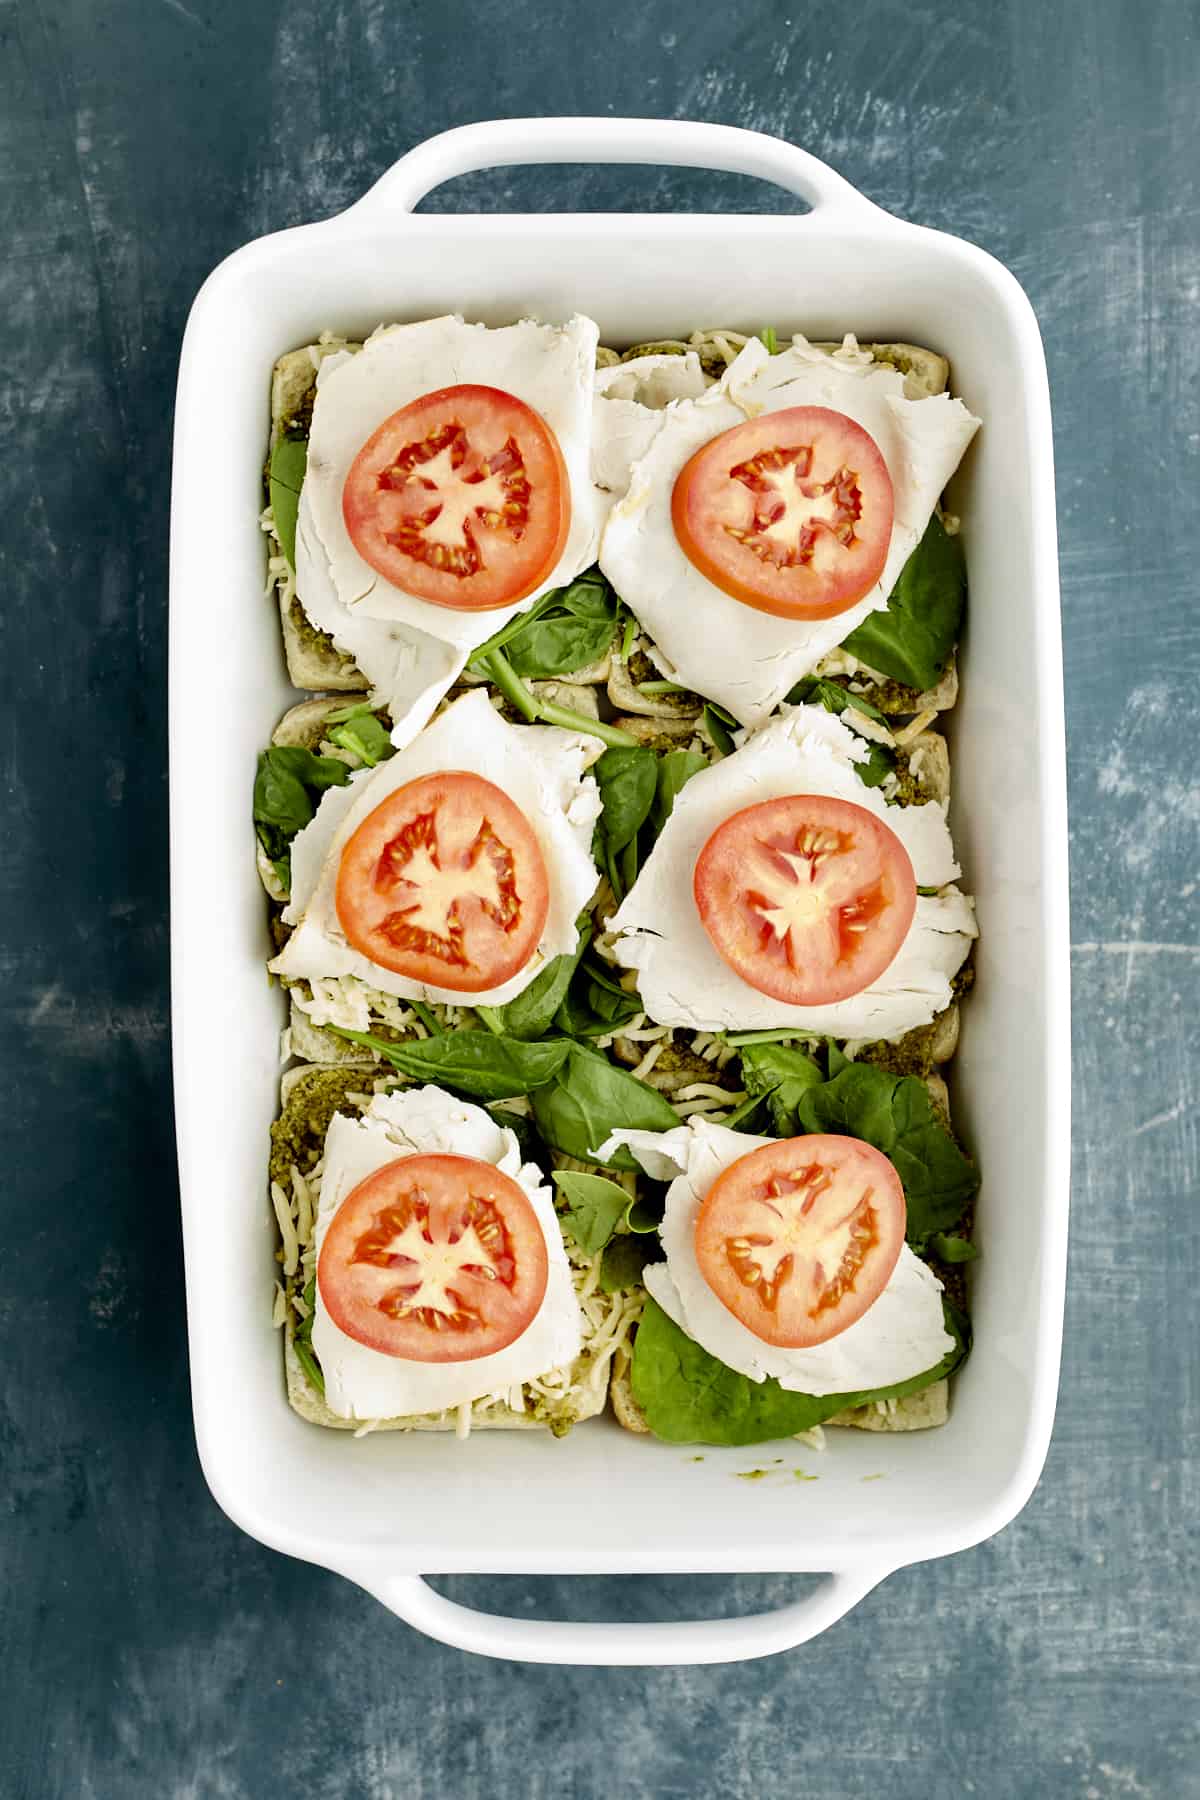 Sliced ciabatta buns in a white baking dish layered with pesto, spinach, turkey, and tomatoes